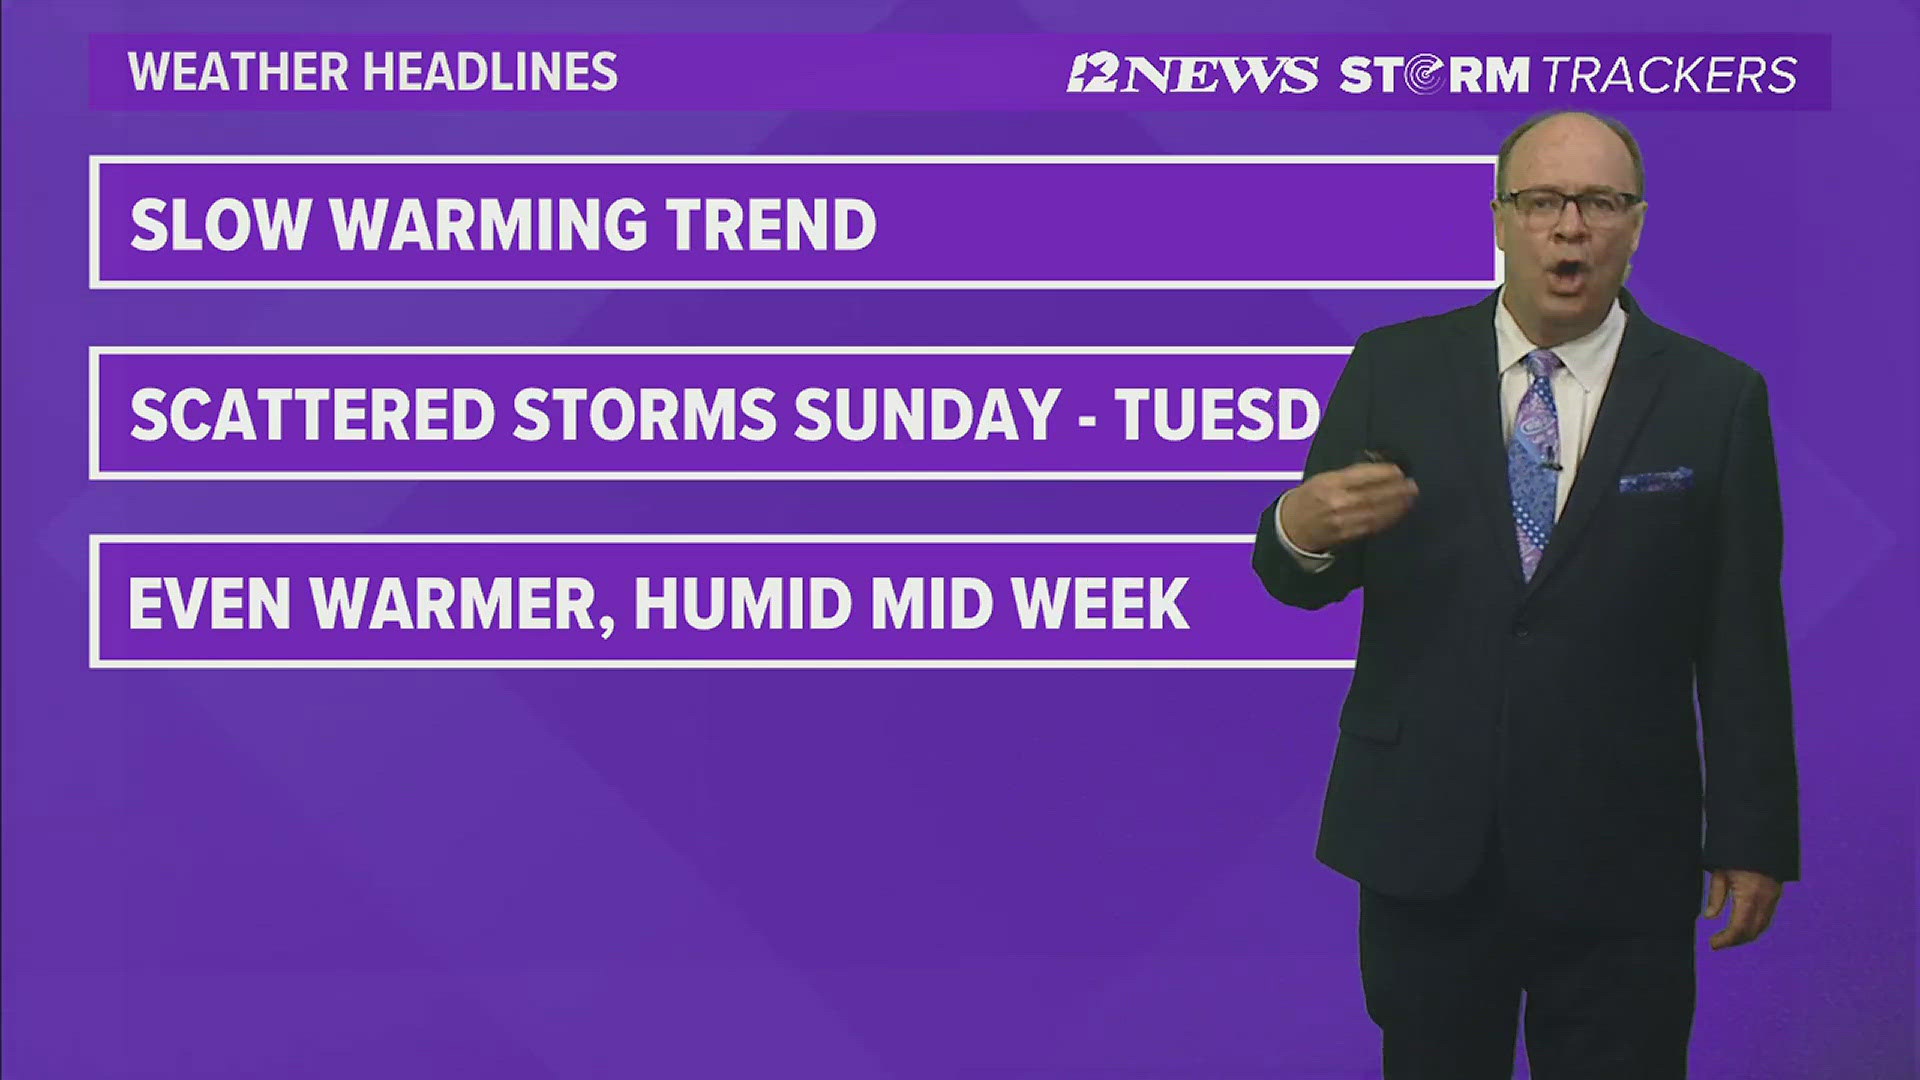 More warm humid weather on the way